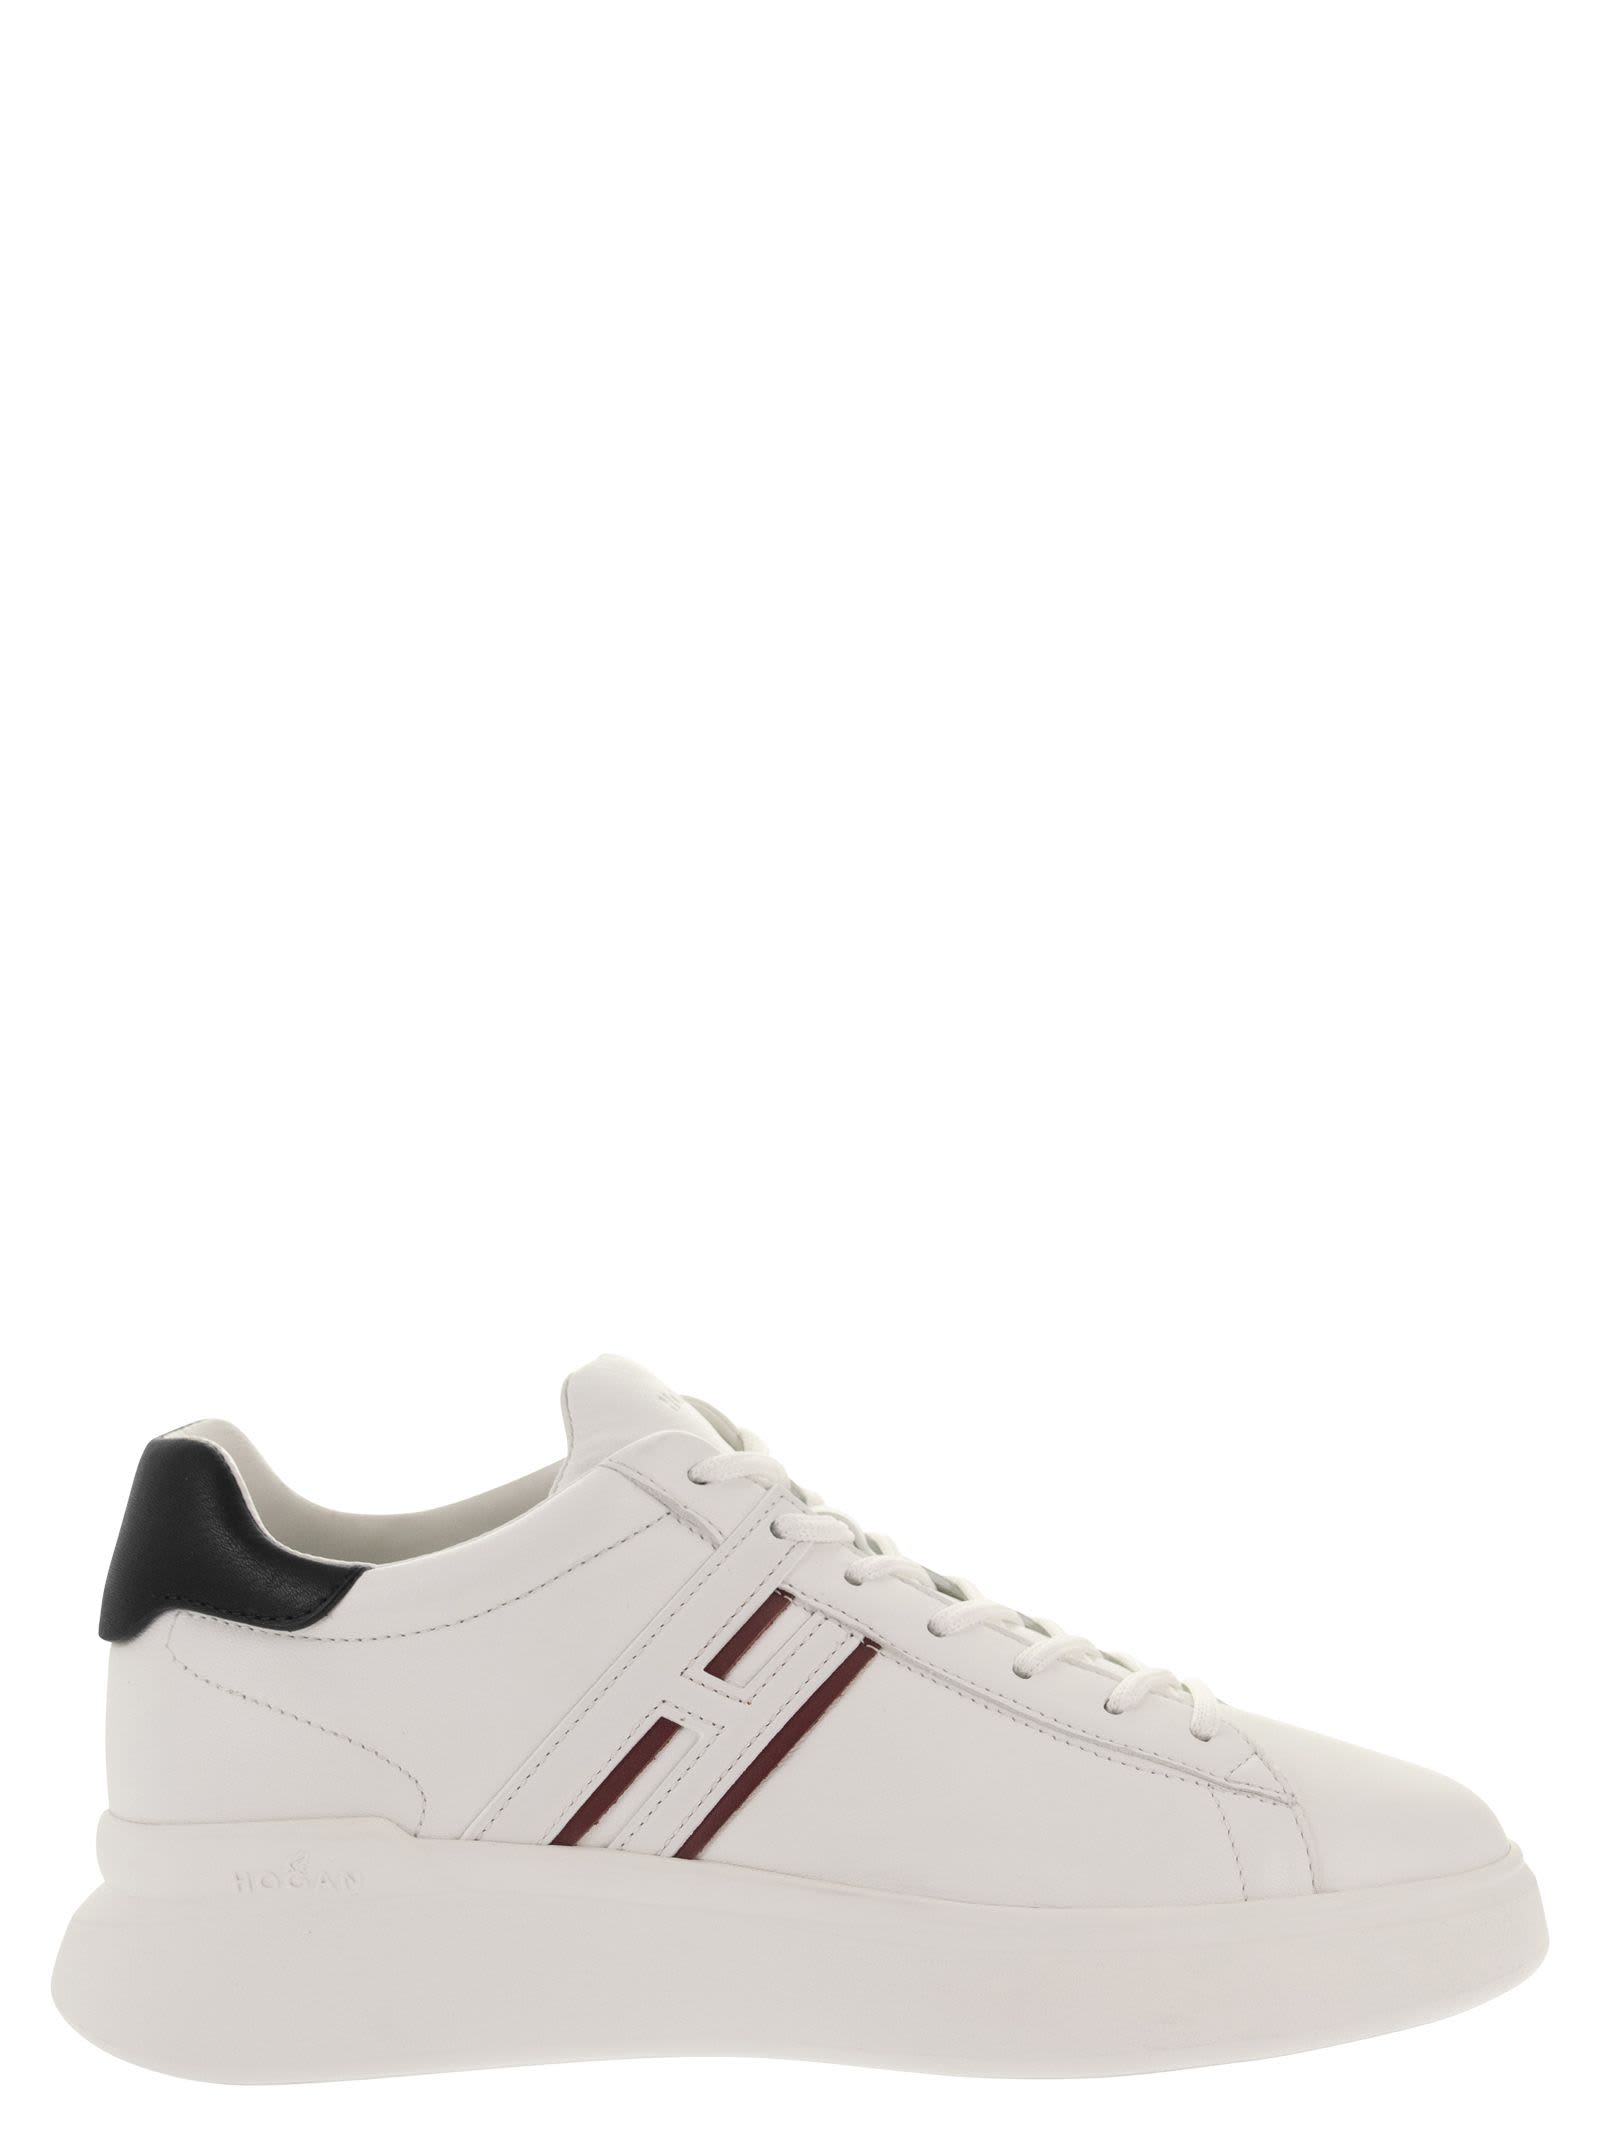 Shop Hogan H580 - Sneakers In White